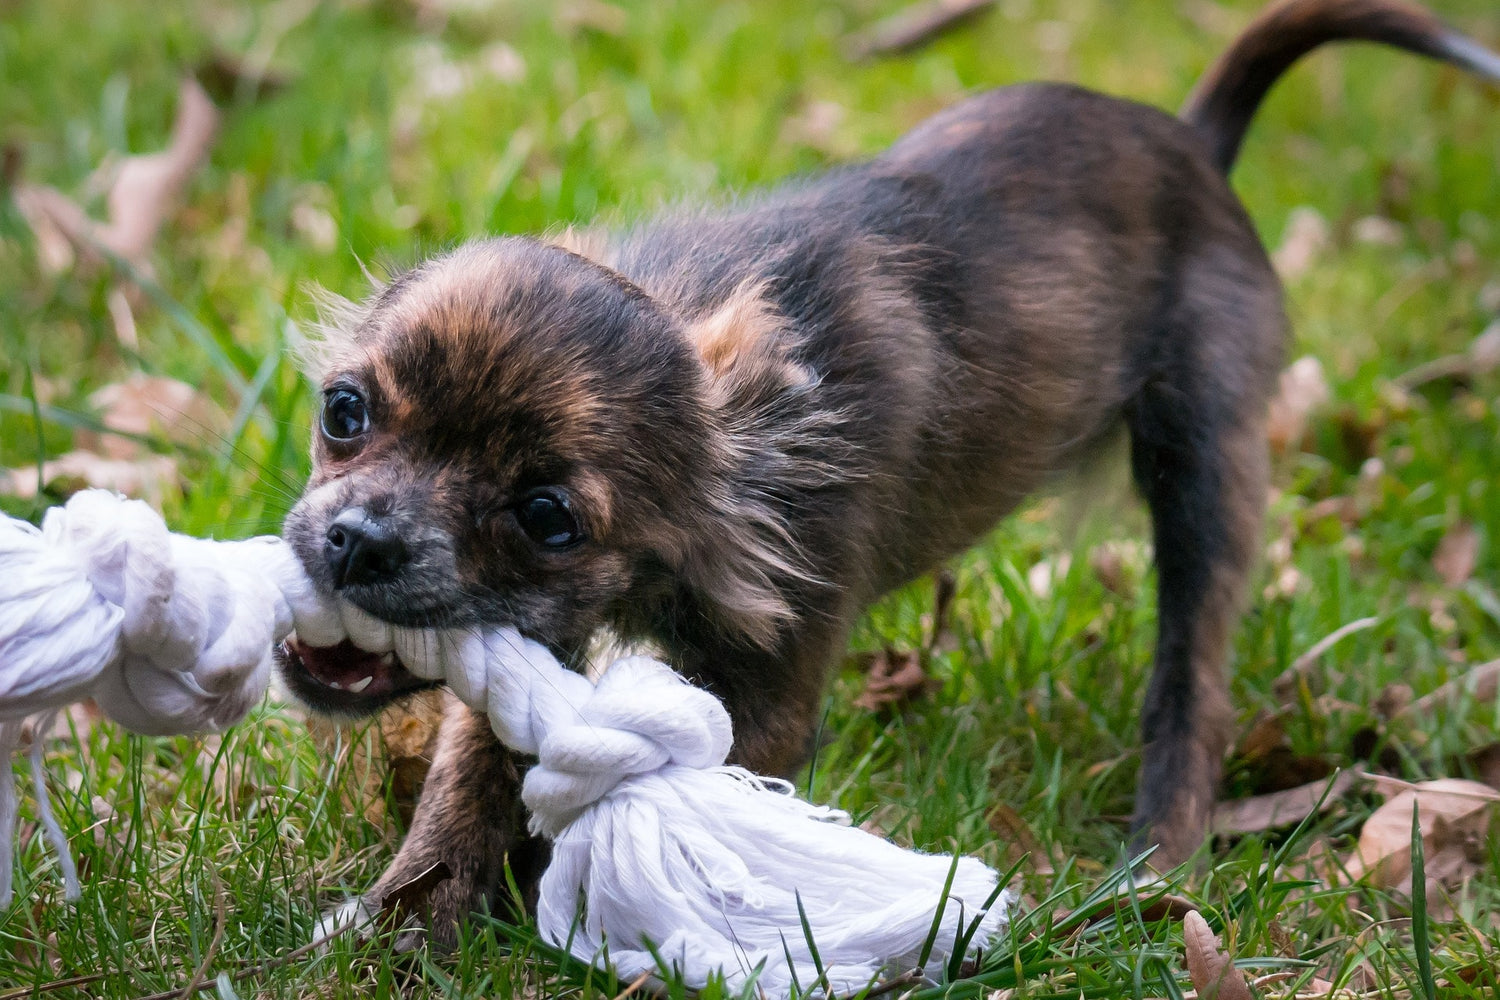 Environmental Enrichment for Pets - What It Is and Why It Matters